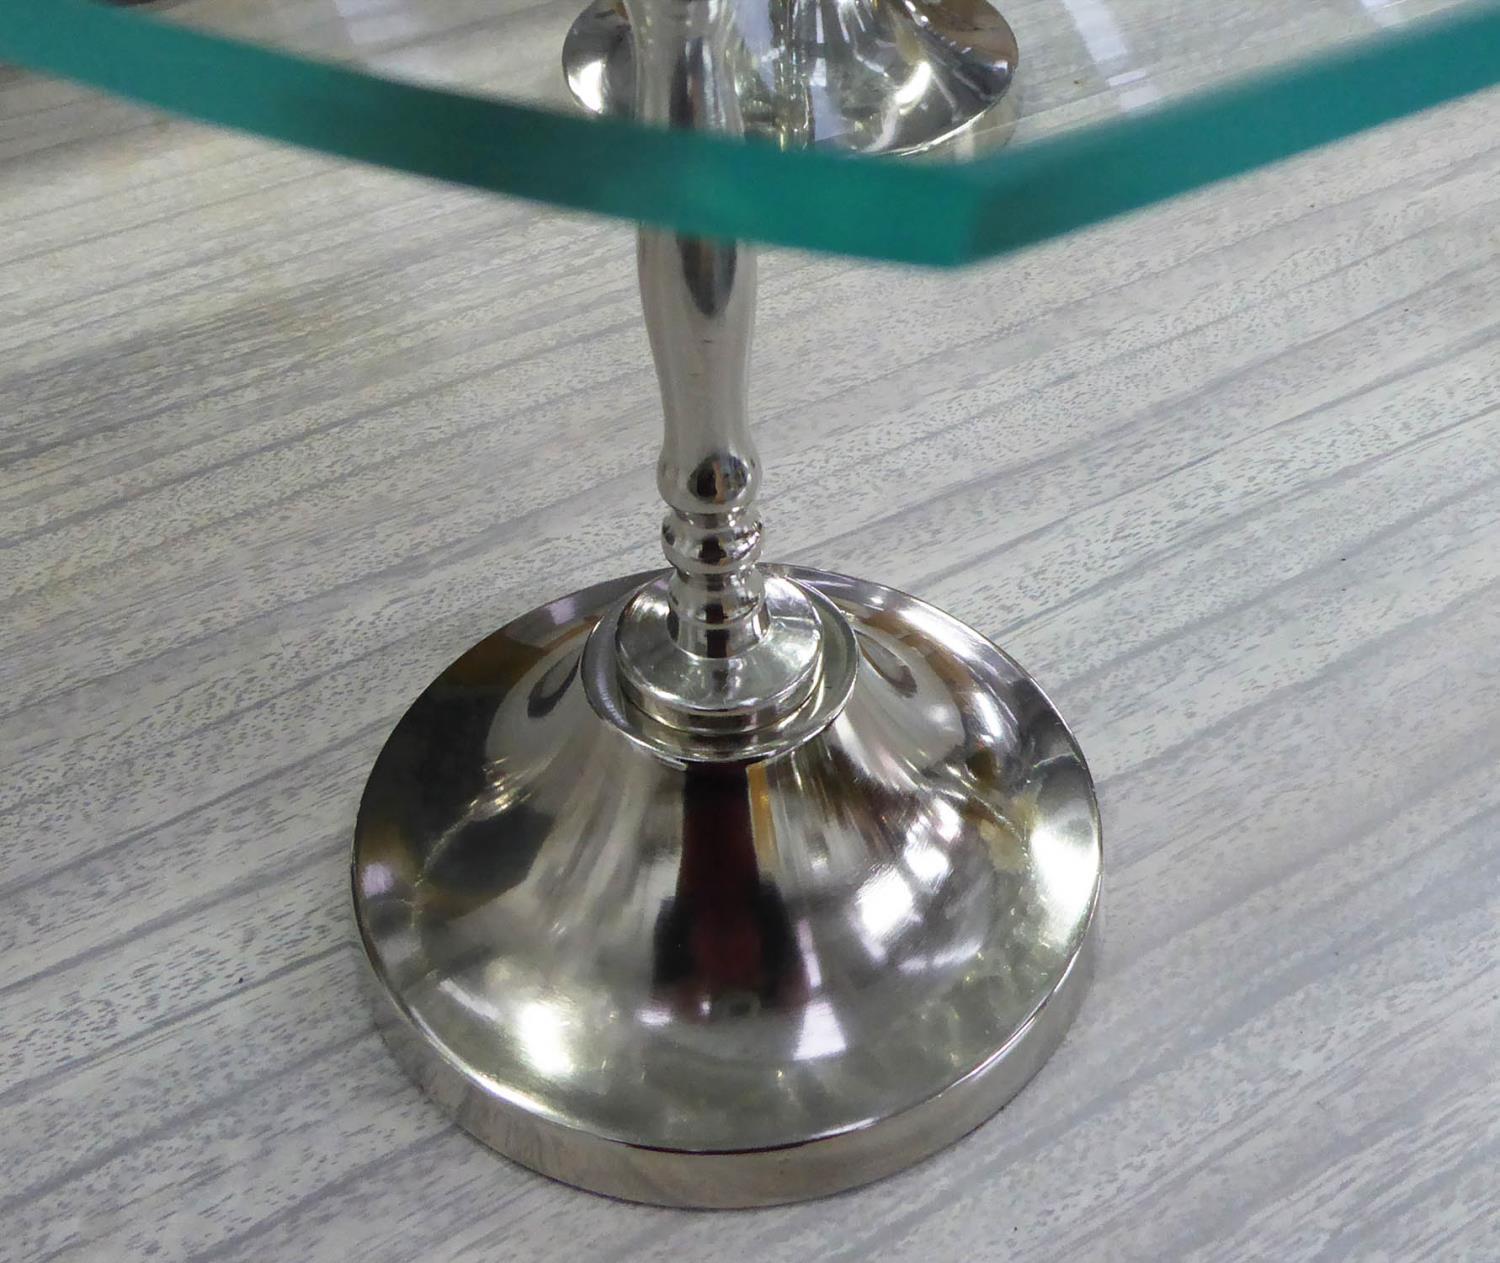 CAKE STANDS, a pair, 1920's French style, glass and polished metal, 45.5cm x 20.5cm x 48cm. (2) - Image 3 of 5